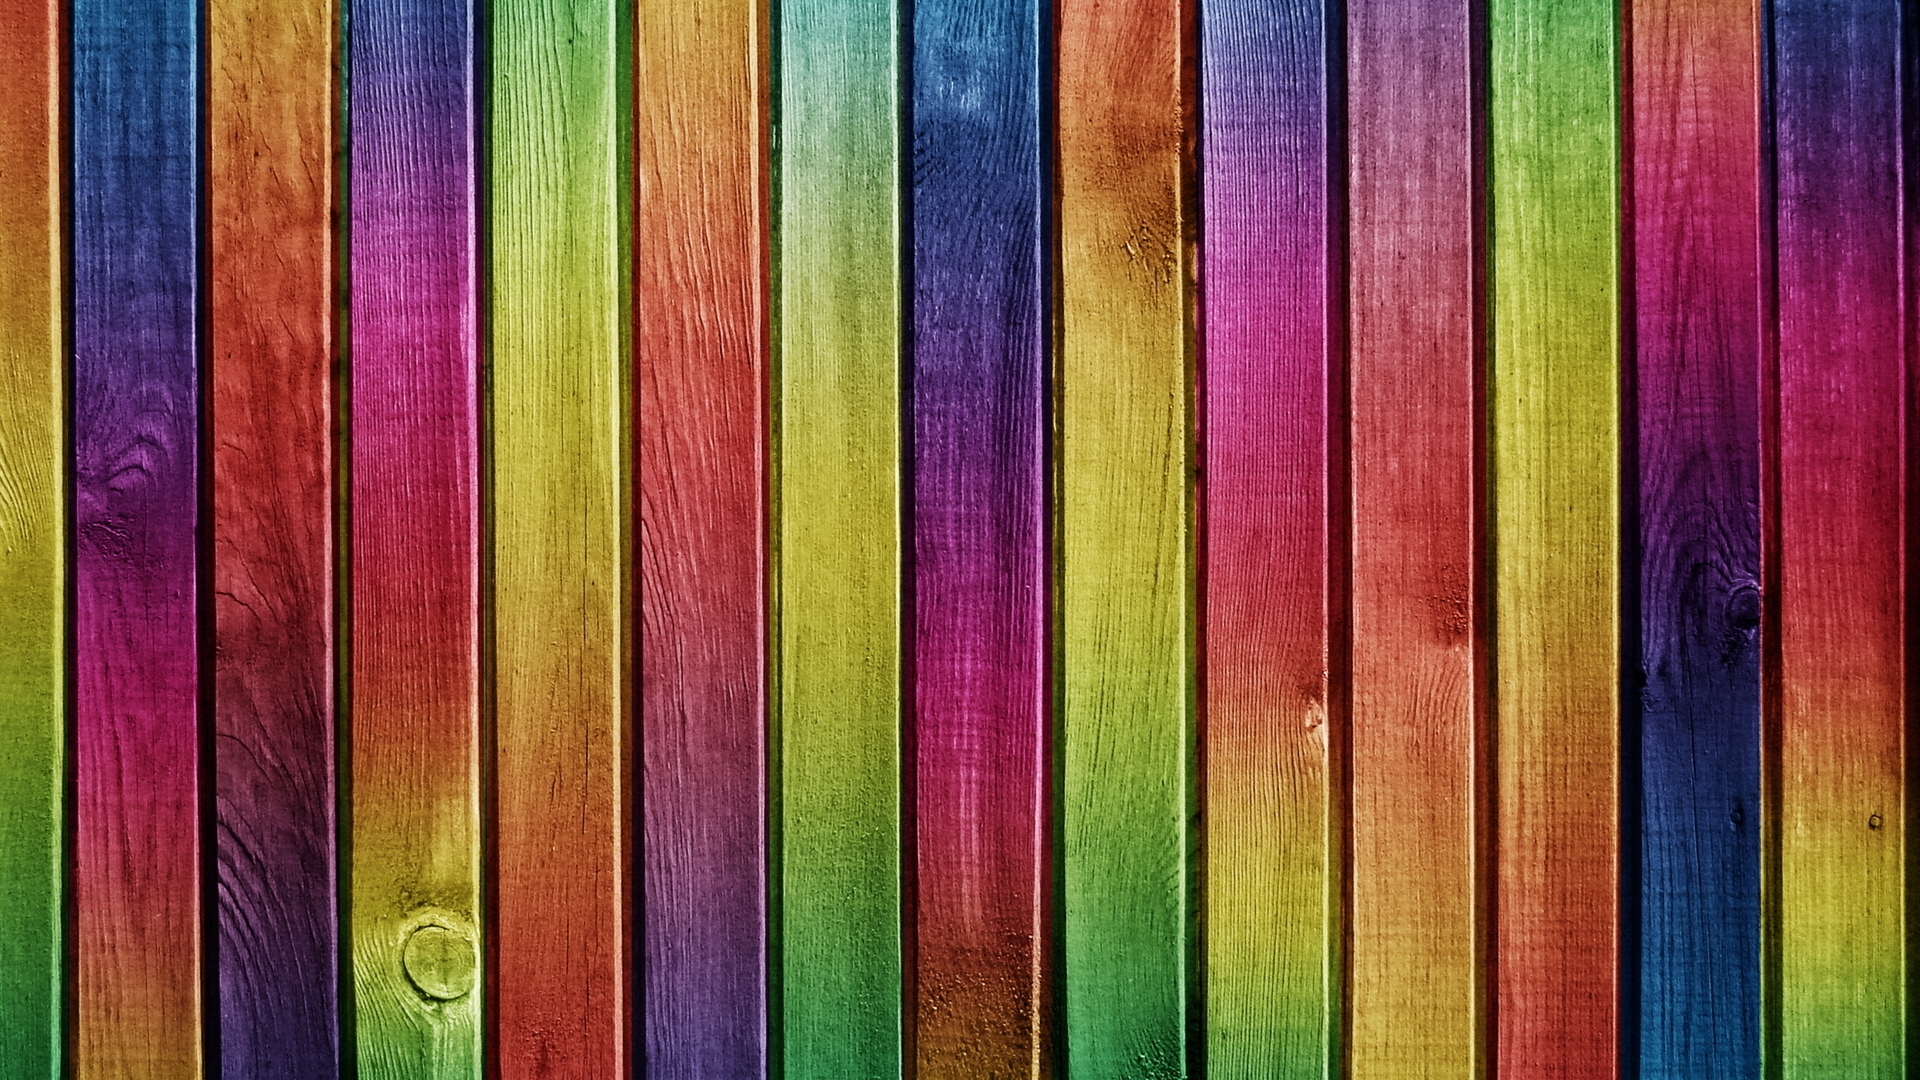 Colourful Wood Painting for 1920 x 1080 HDTV 1080p resolution